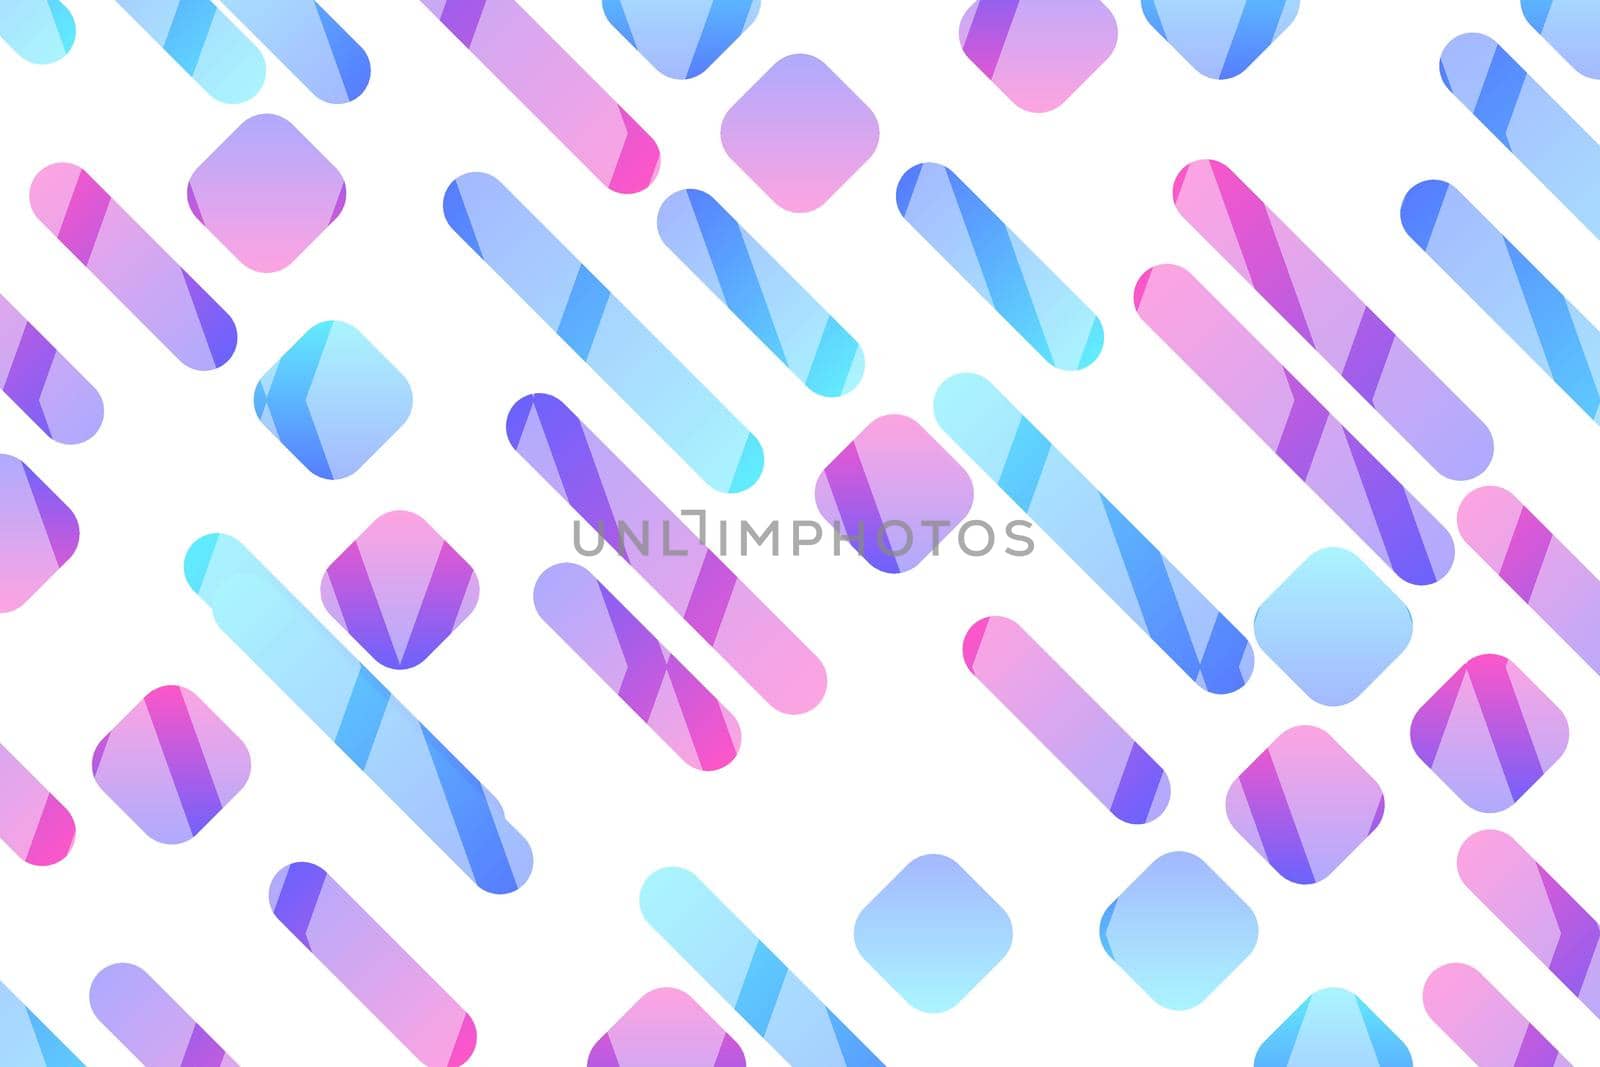 Futuristic cover design for notebook paper, copybook brochures, book, magazine, print. Geometric abstract background with gradient multicolor elements. Colored pattern